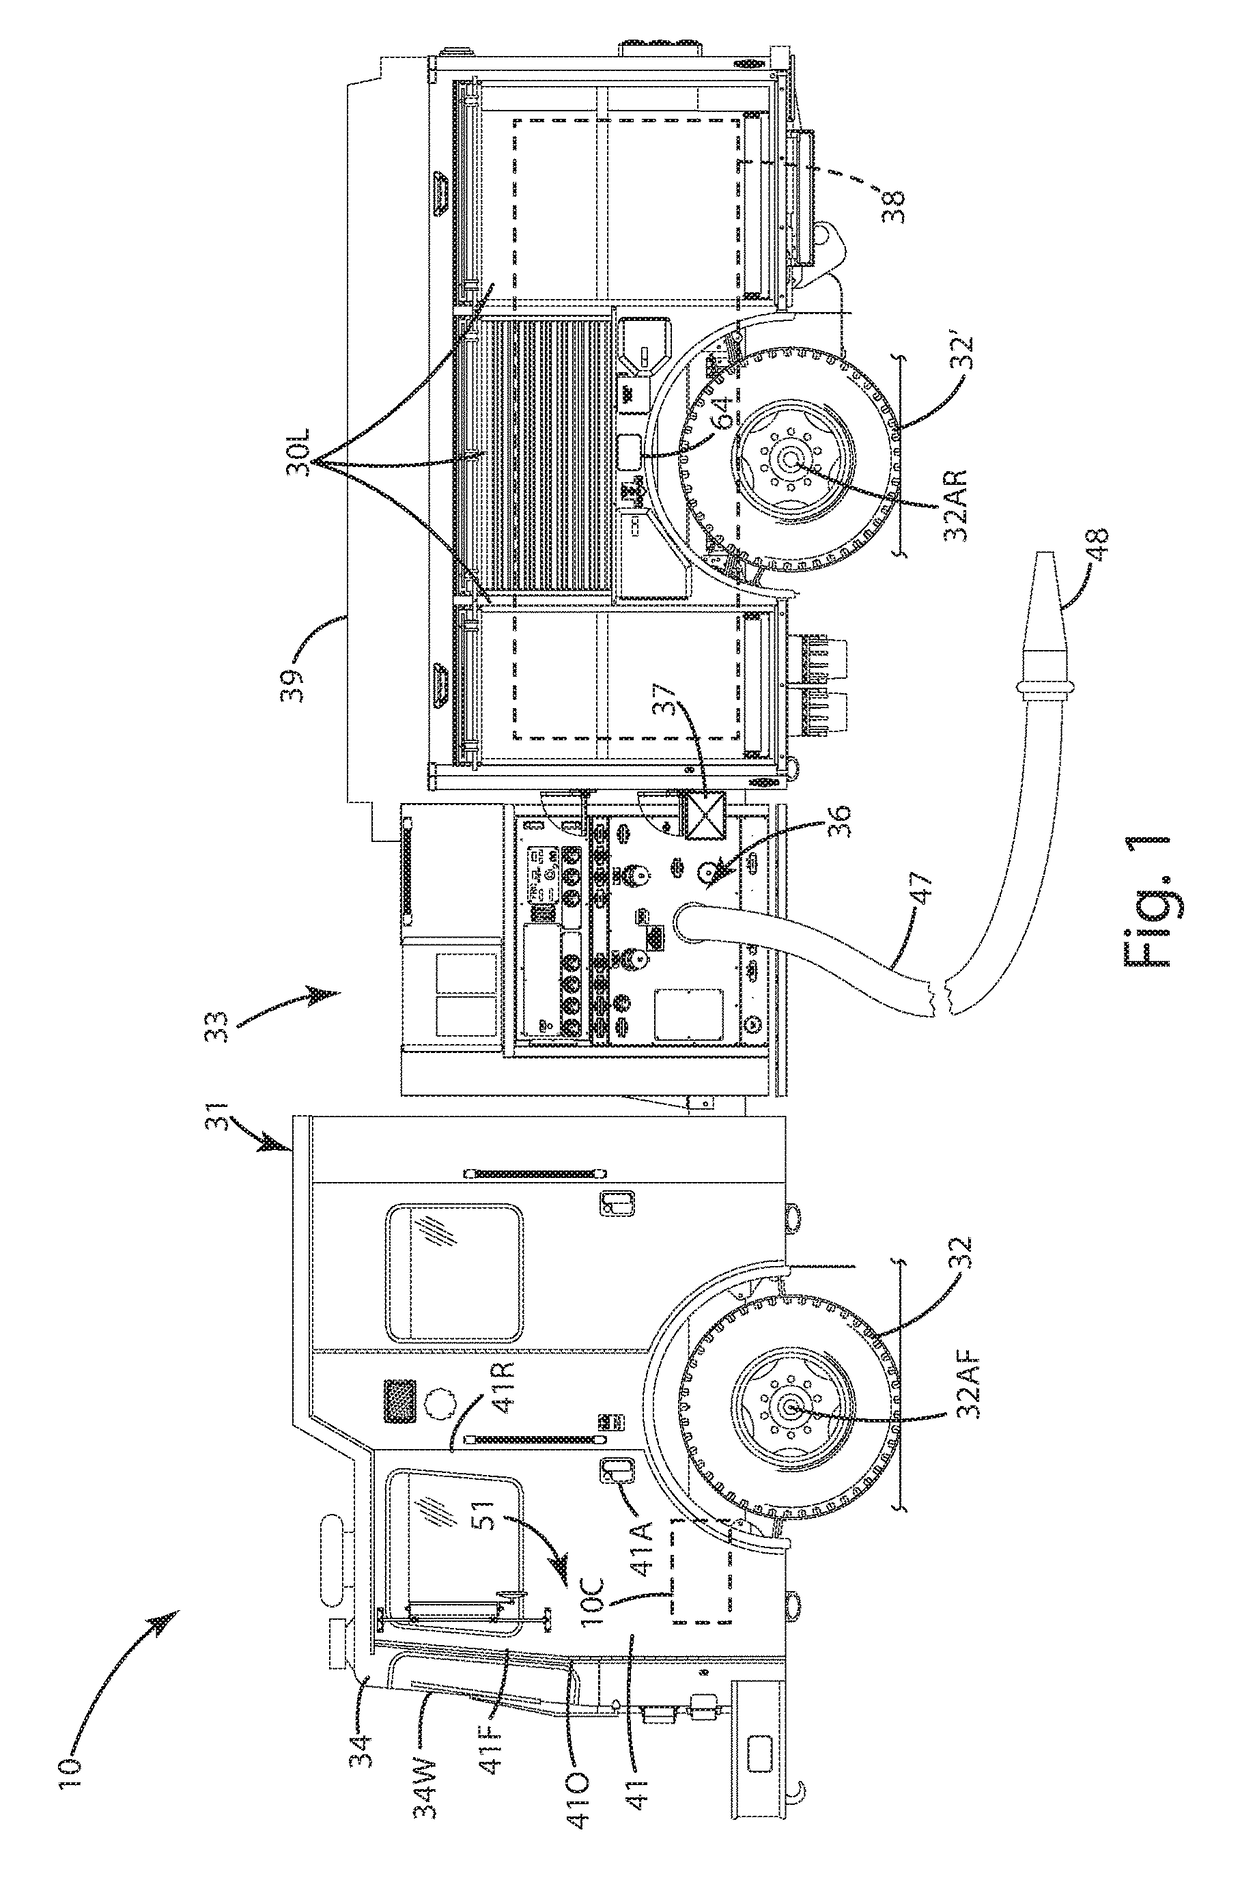 Firefighting or rescue apparatus including a memory device to store and provide access to apparatus information